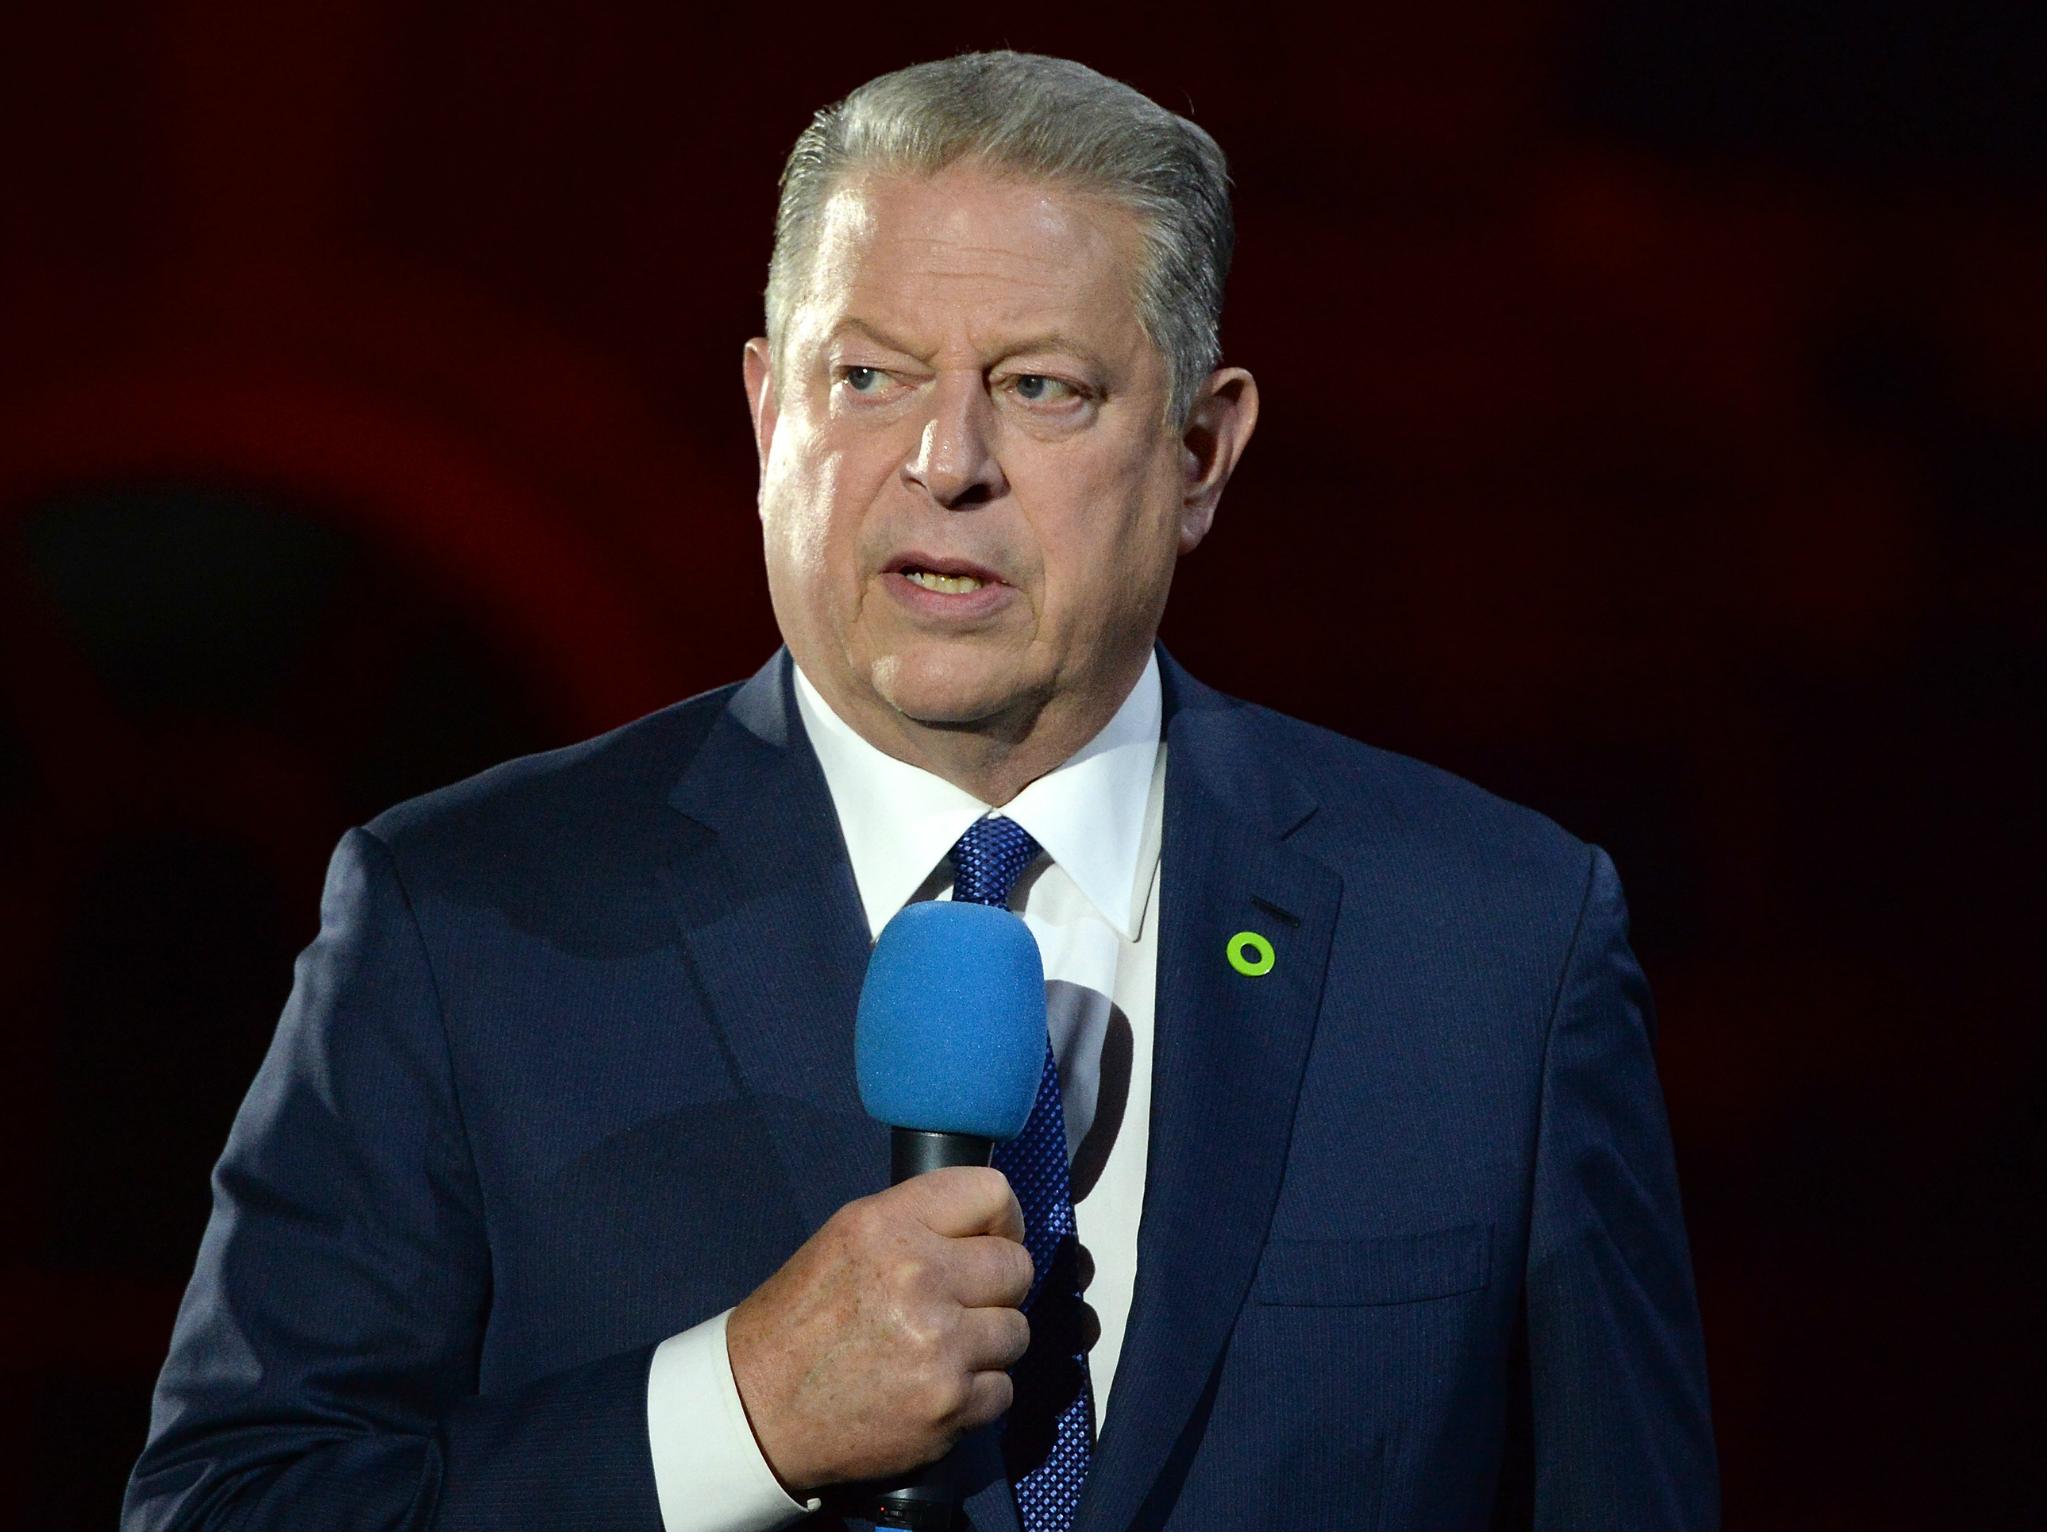 Former US Vice President Al Gore speaks on stage as he introduces the UK Premiere of 'An Inconvenient Sequel: Truth To Power' at Film4 Summer Screen in London on 10 August 2017